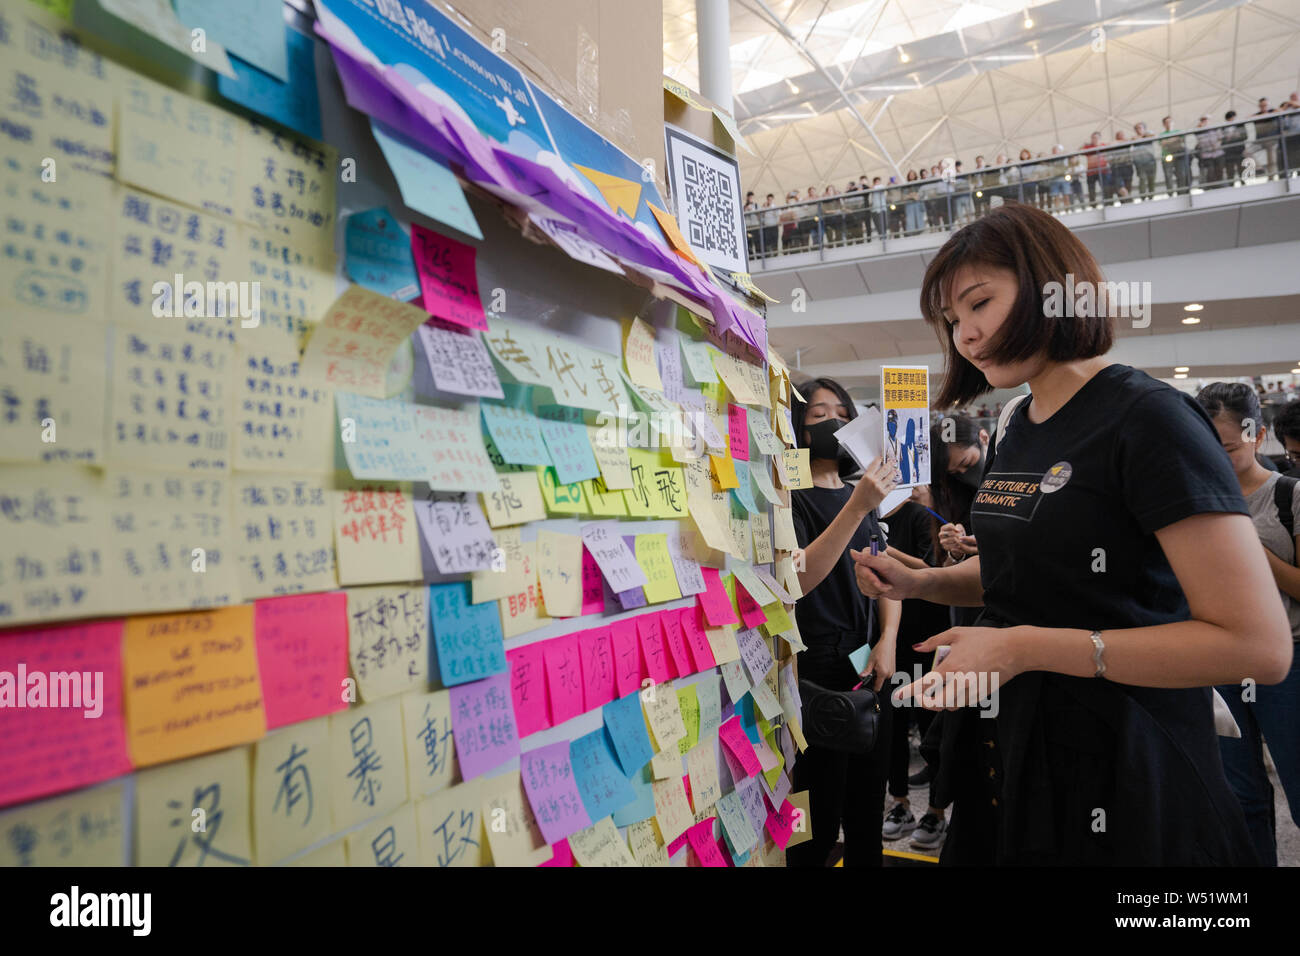 A demonstrator put a sticky note with messages written on it on a pop up Lennon wall during the protest at the airport arrival hall.Hundreds of anti government protesters staged a sit in protest at the Hong Kong international airport terminal, the first of three straight days of demonstrations after clashes last week triggered fears that a wider confrontation could erupt in the city. Stock Photo